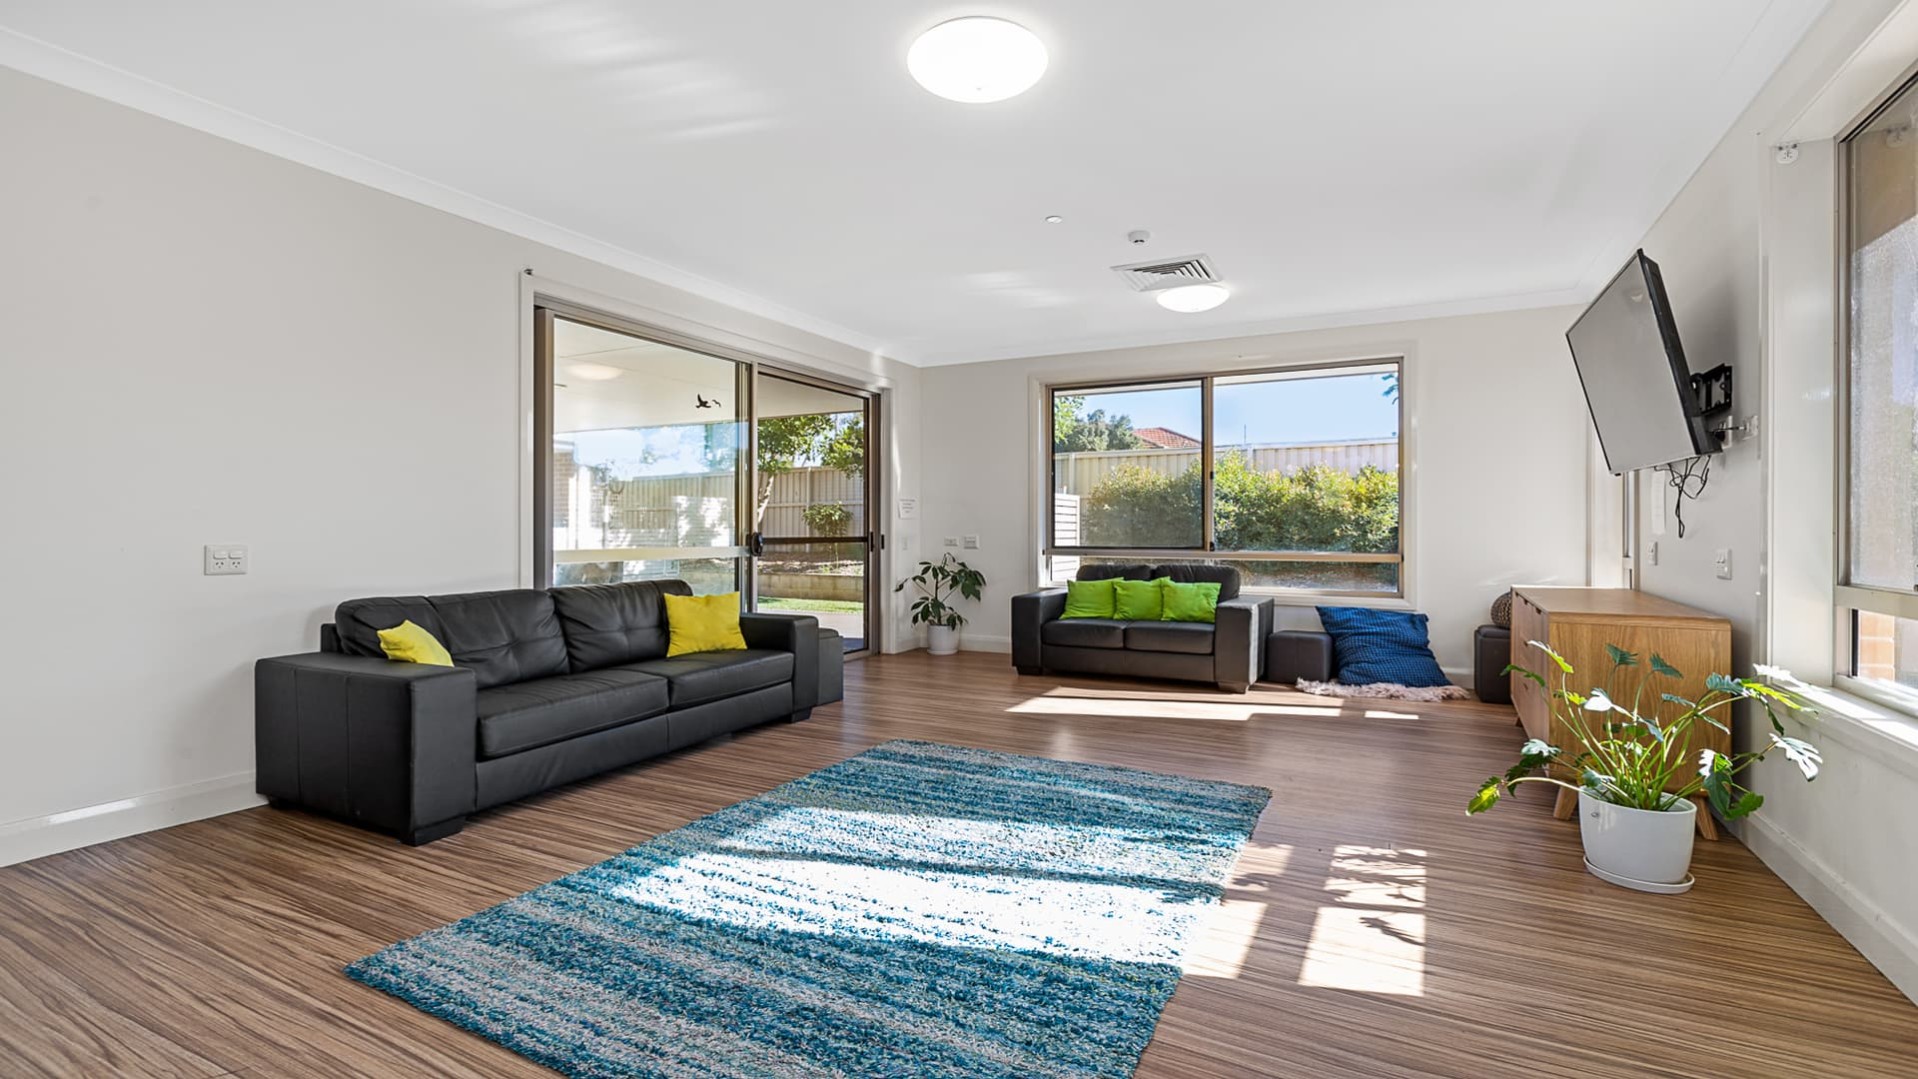 Main loungeroom with two grey couches, blue rug on hard wood flooring, wall mounted television and large windows and sliding door entry to outdoors.